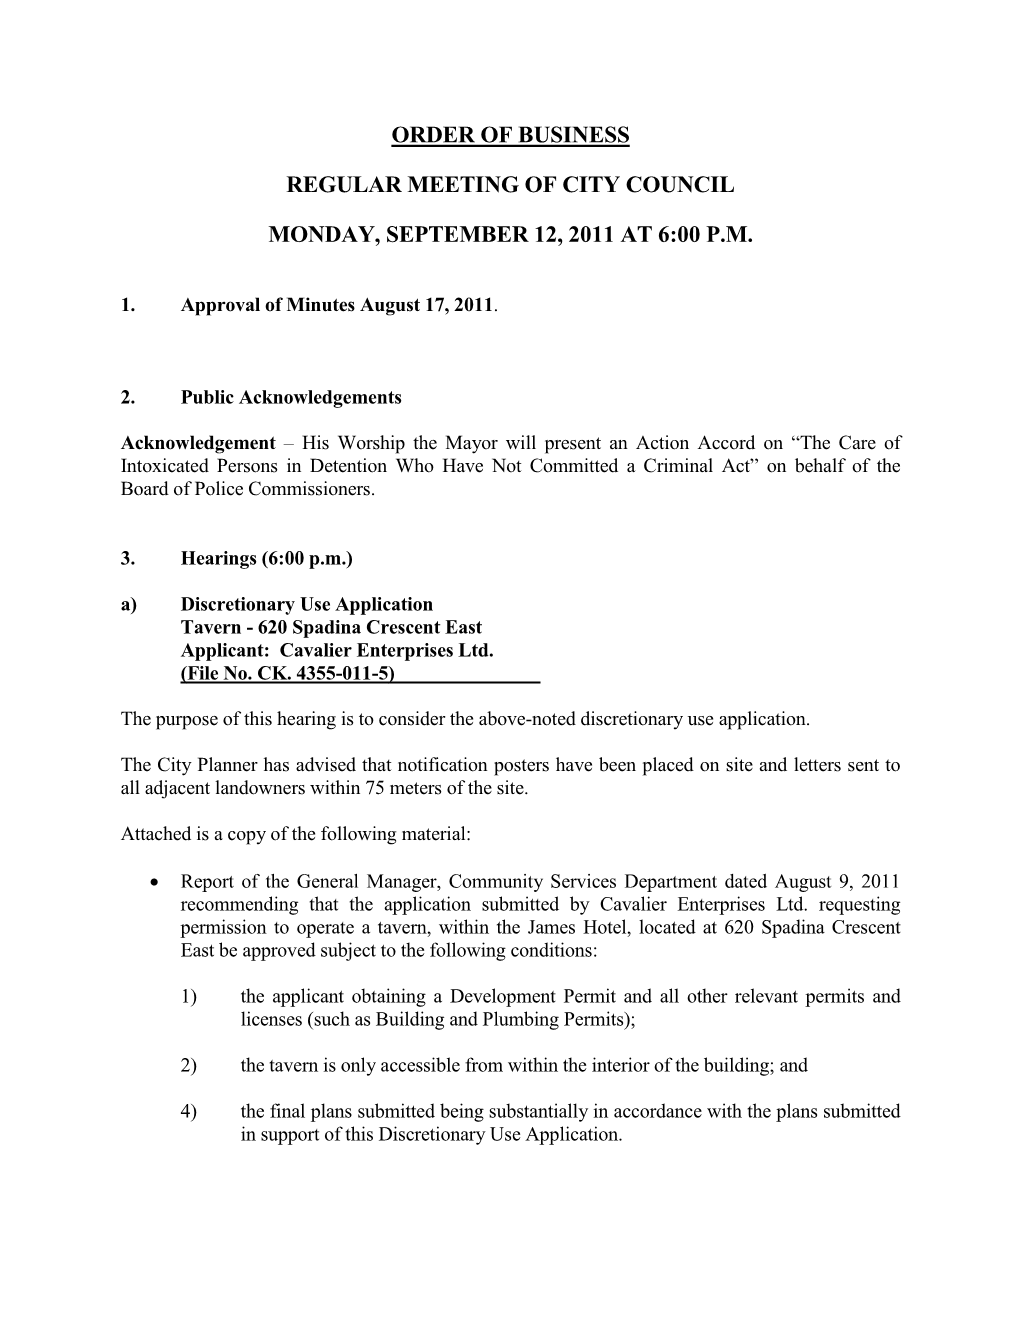 Order of Business Regular Meeting of City Council Monday, September 12, 2011 at 6:00 Pm